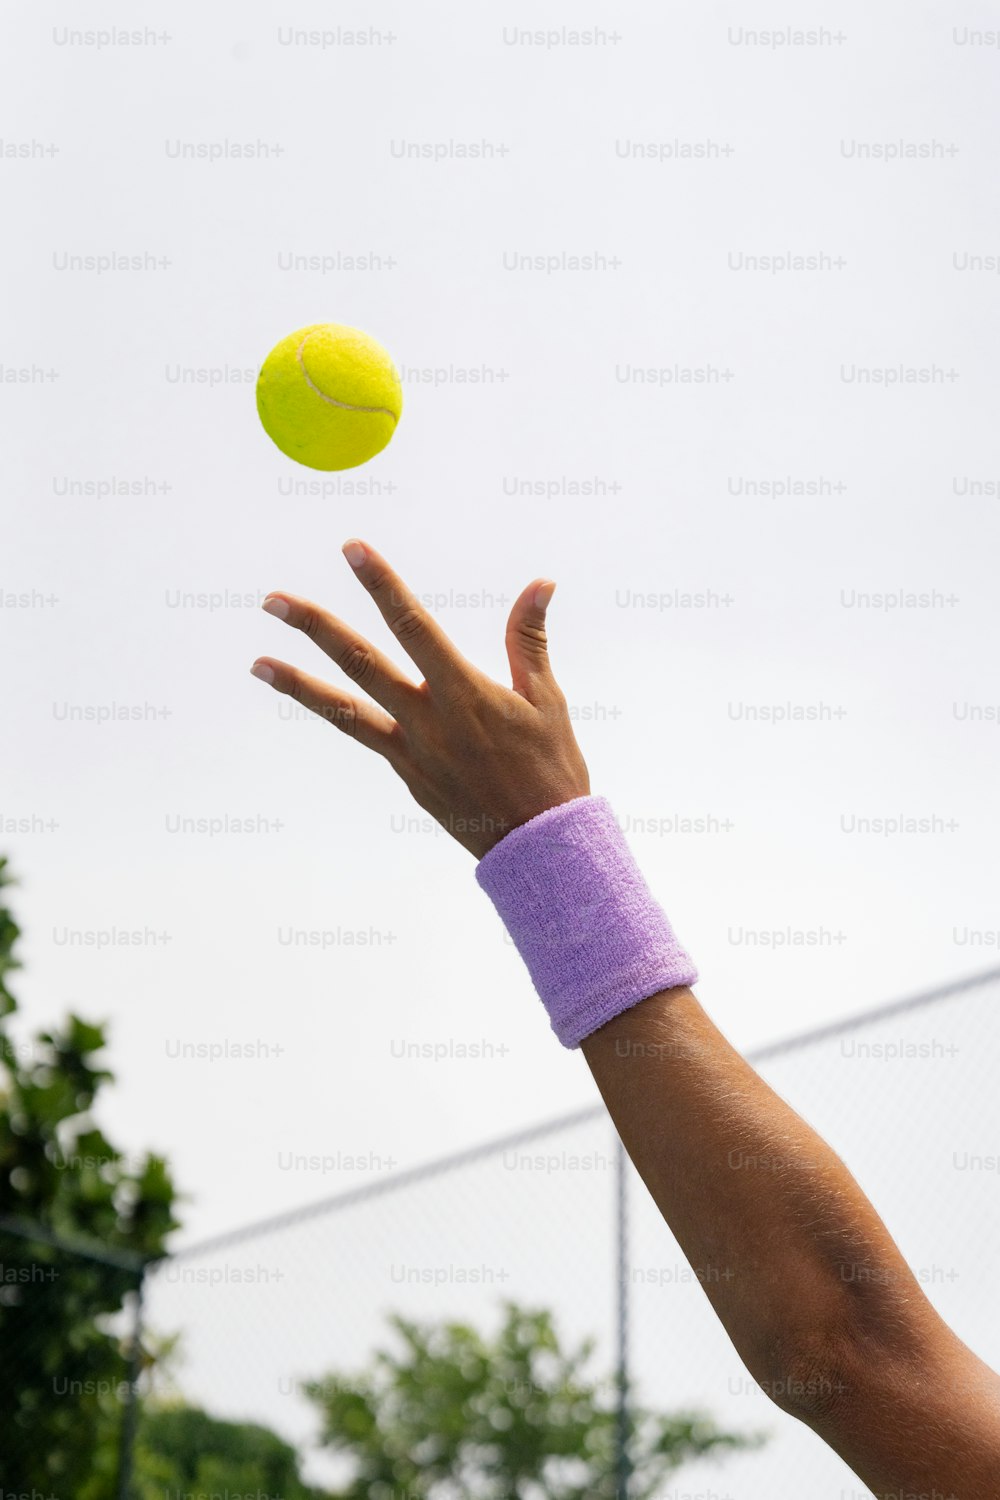 a person reaching up to catch a tennis ball